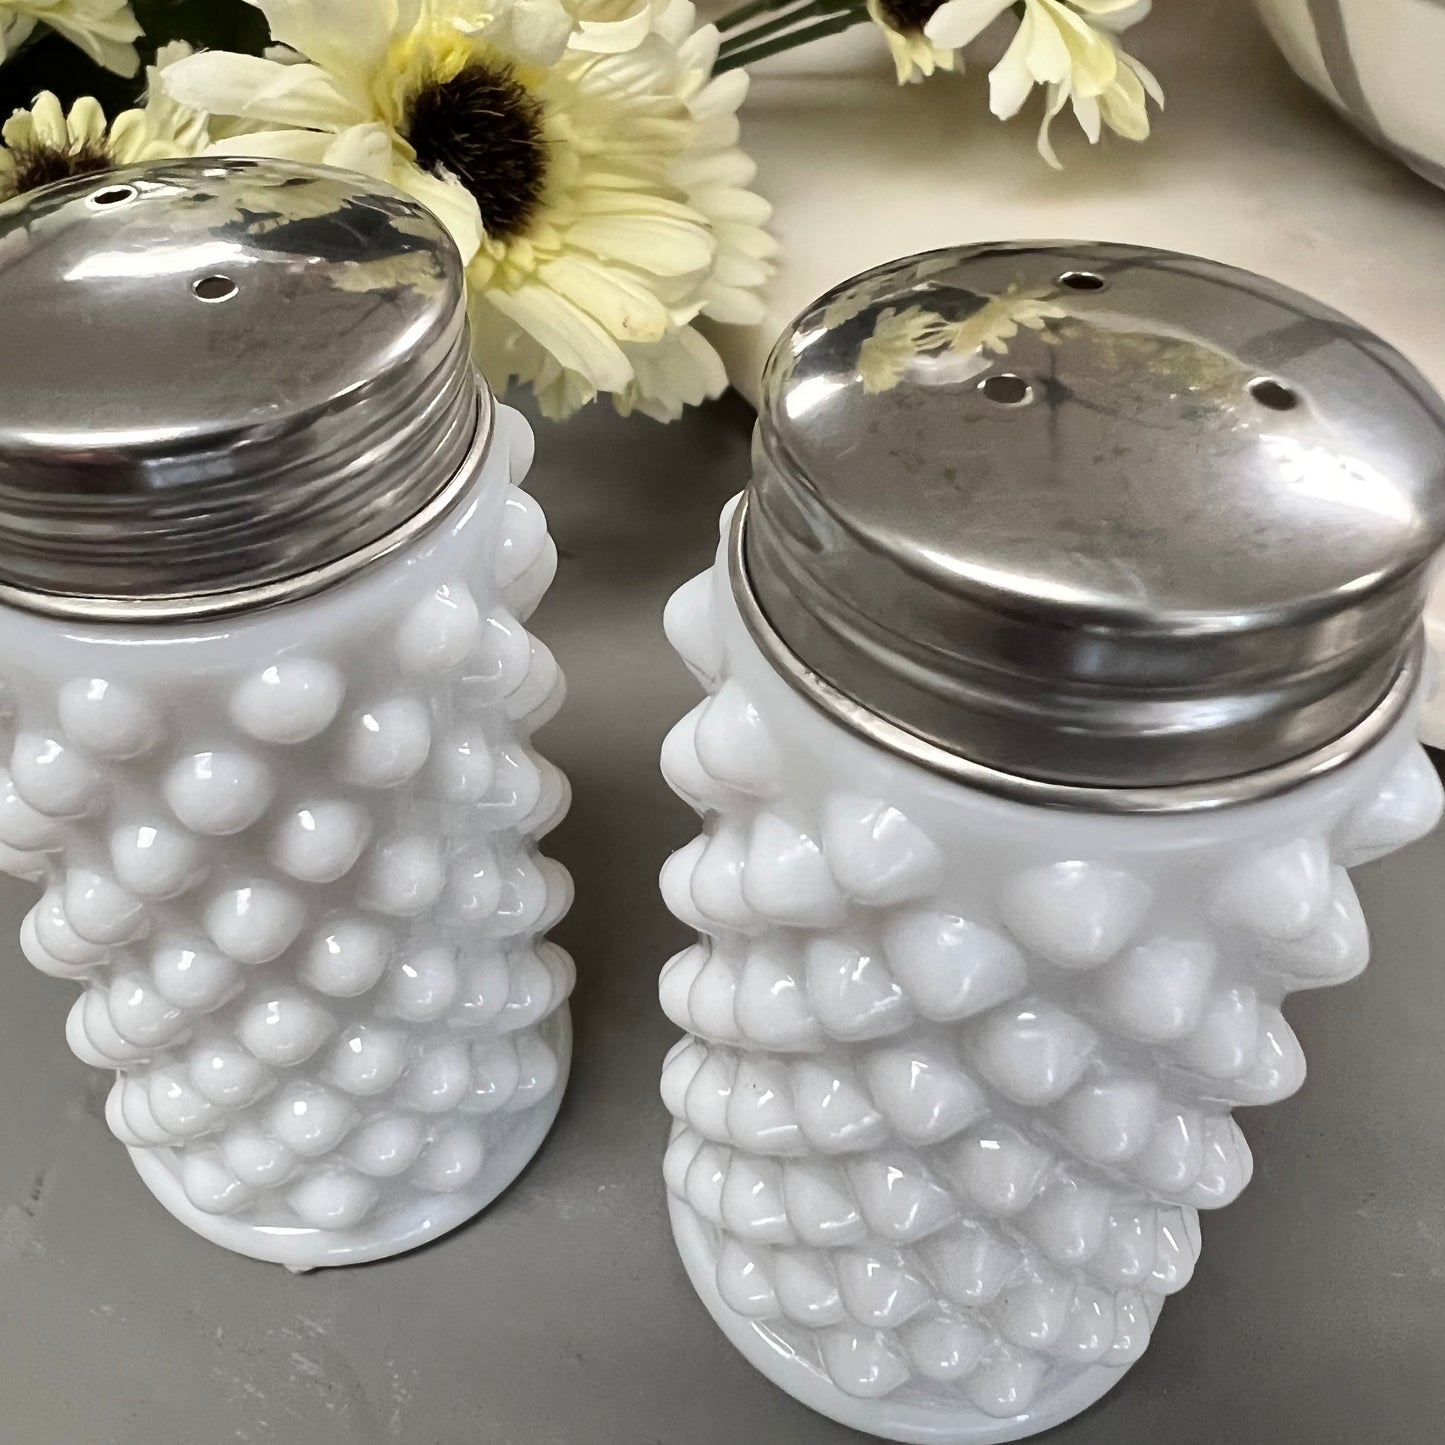 angled view of milk glass salt and pepper shakers displayed on a gray surface next to a bundle of flowers